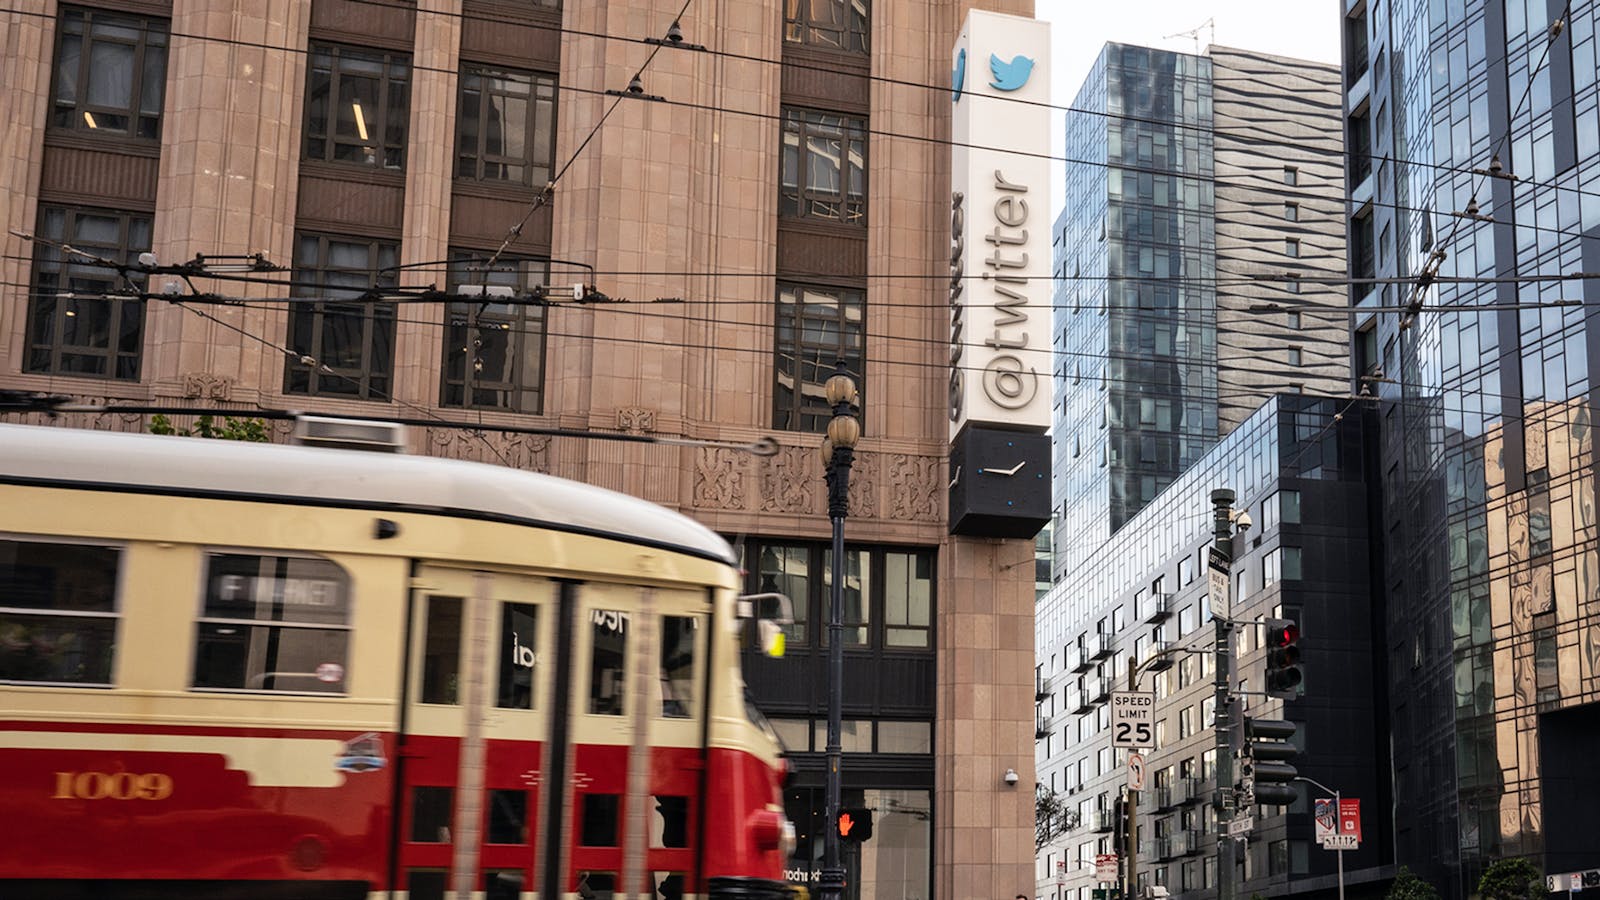 Twitter's San Francisco headquarters. Photo via Getty Images